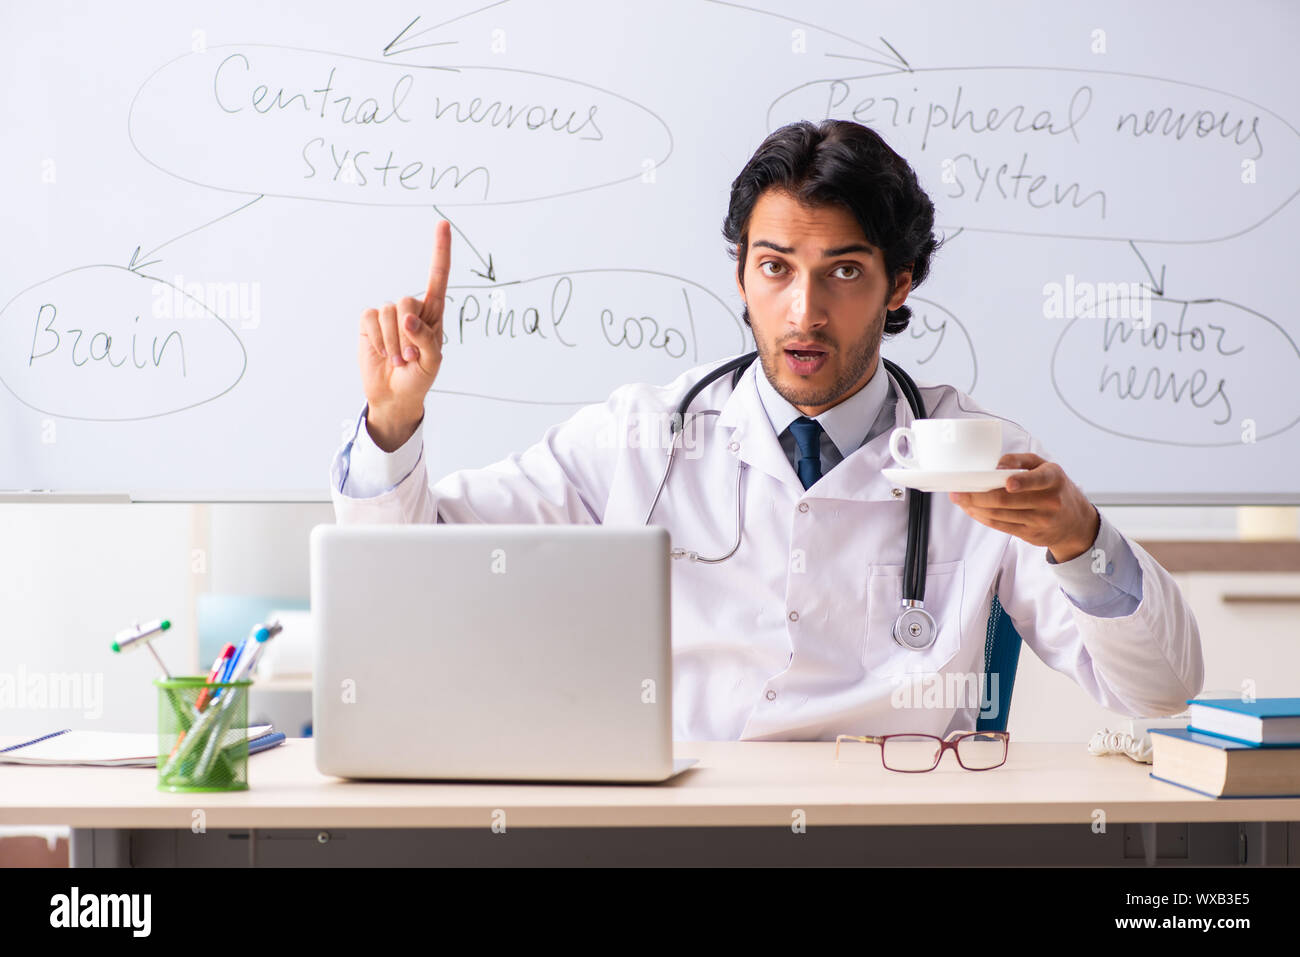 Young male doctor neurologist in front of whiteboard Stock Photo